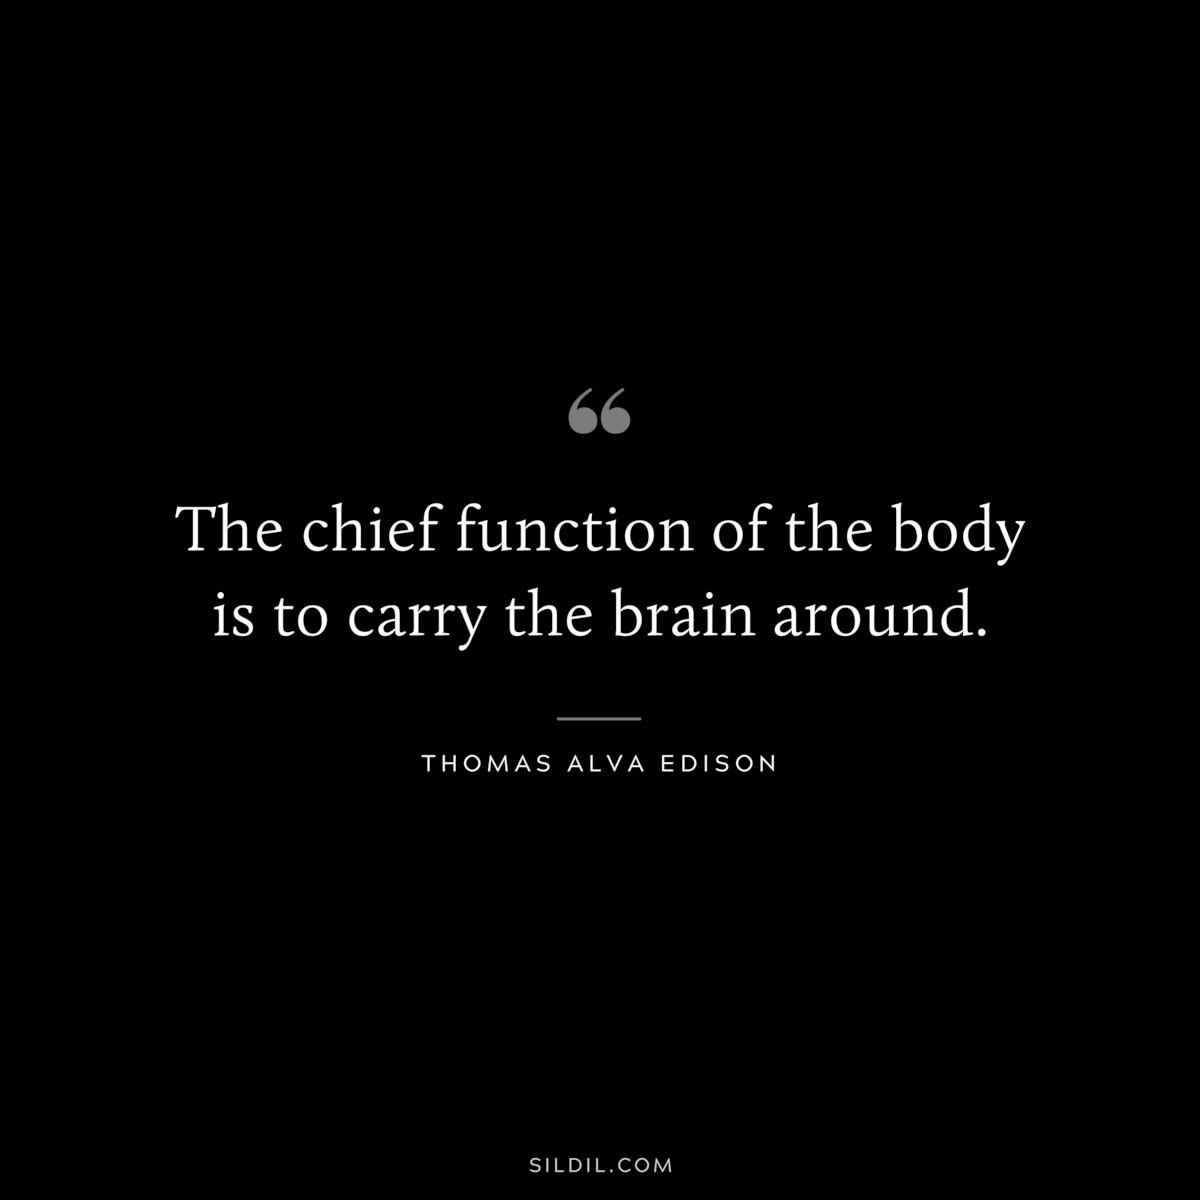 The chief function of the body is to carry the brain around. ― Thomas Alva Edison